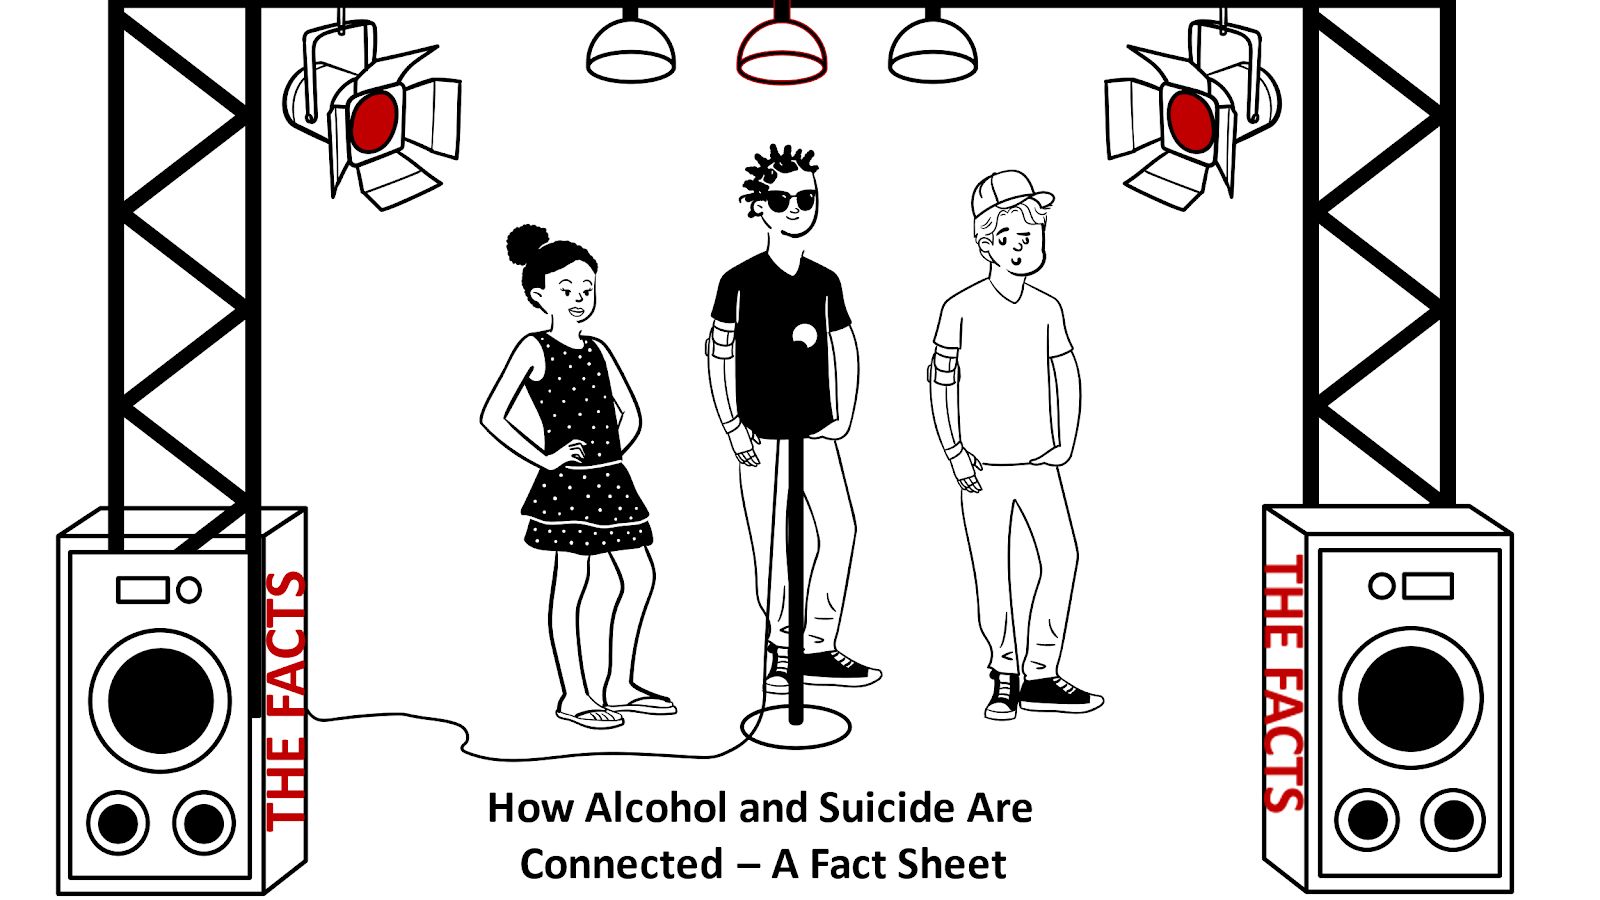 A comic on how alcohol and suicide are connected